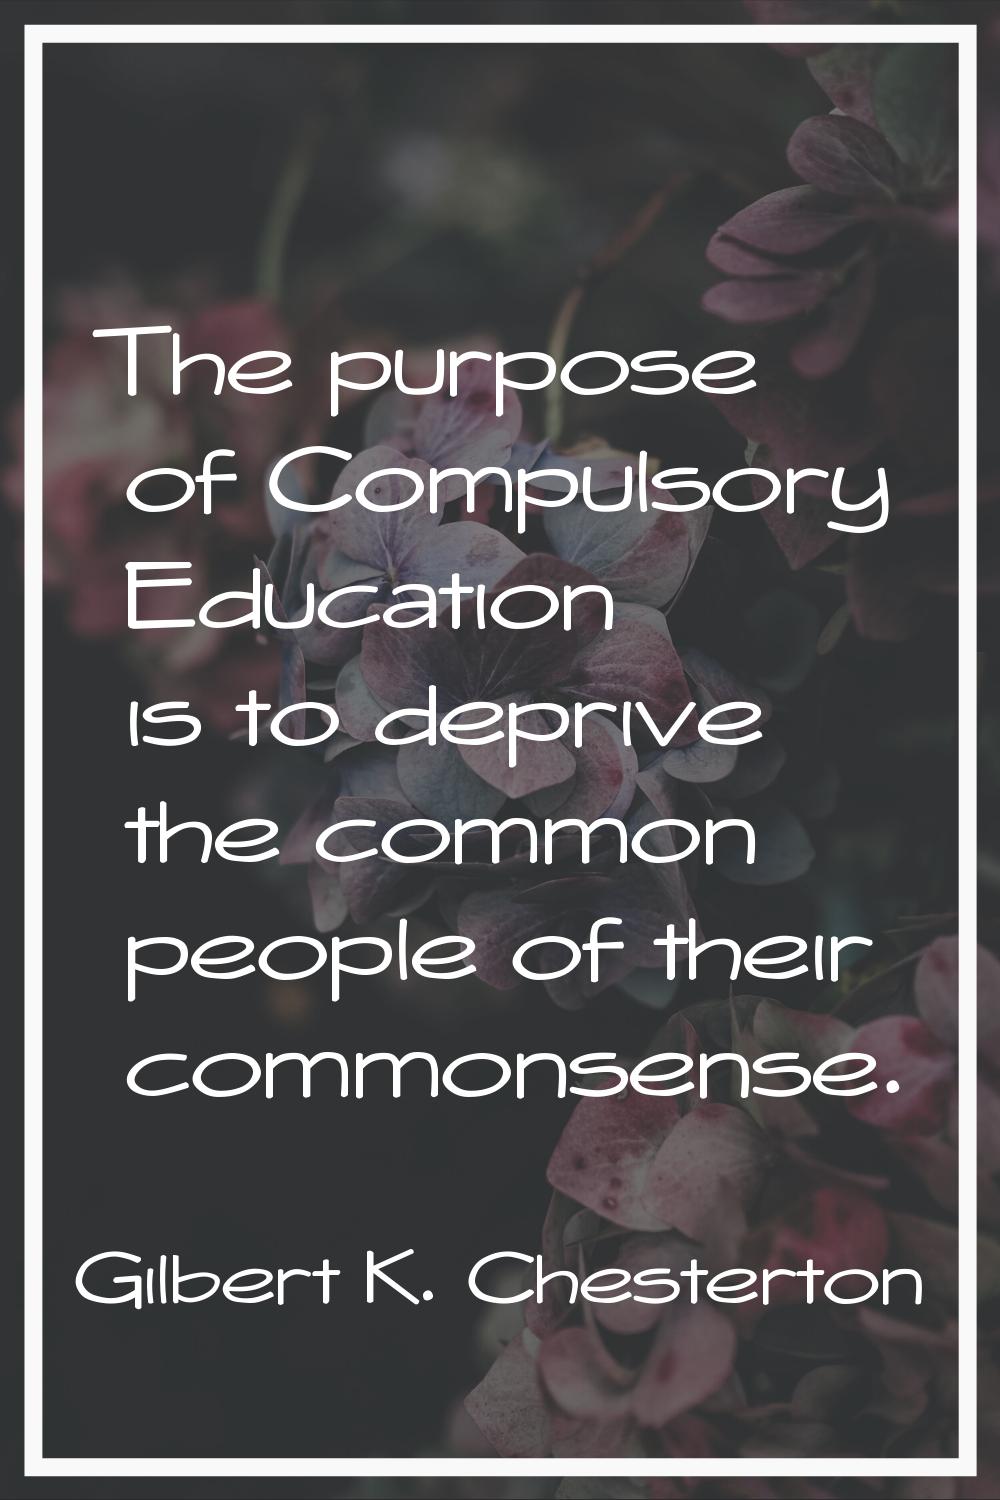 The purpose of Compulsory Education is to deprive the common people of their commonsense.